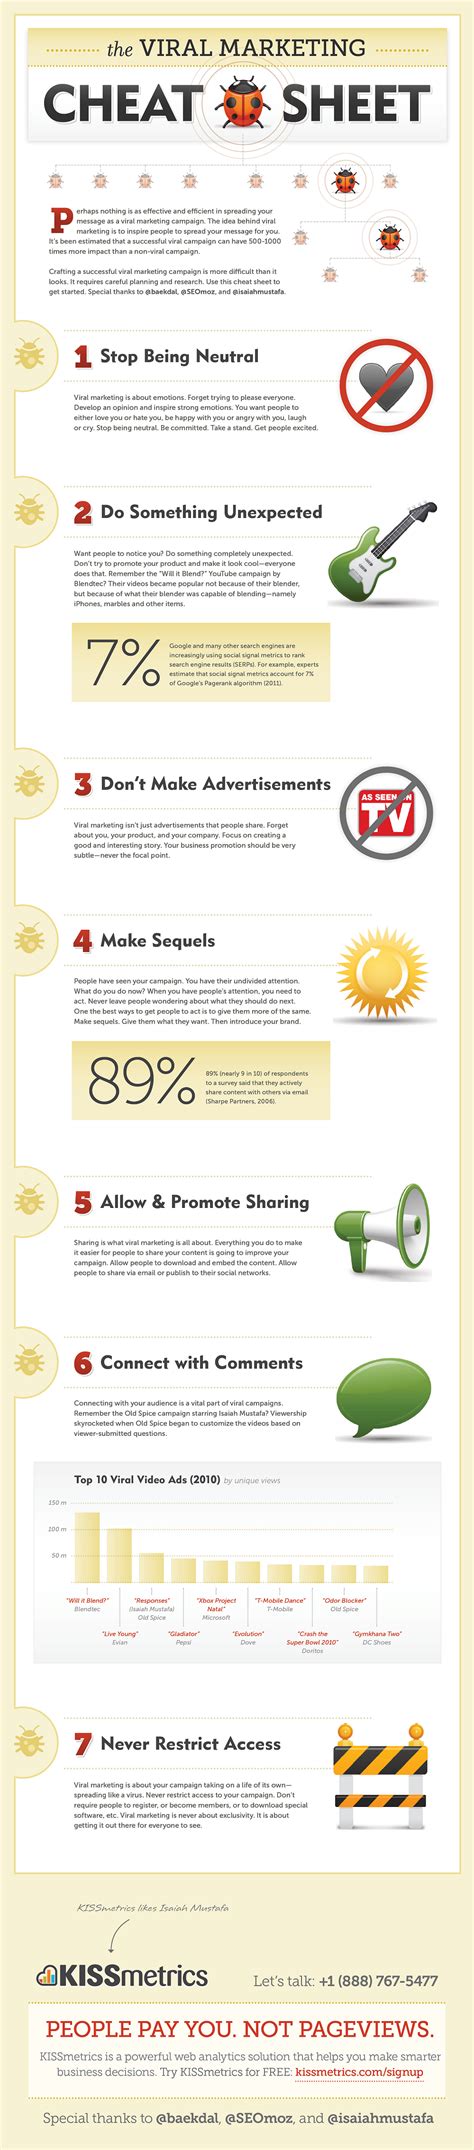 Tips For Making Your Marketing Message Go Viral INFOGRAPHIC The Buffer Blog